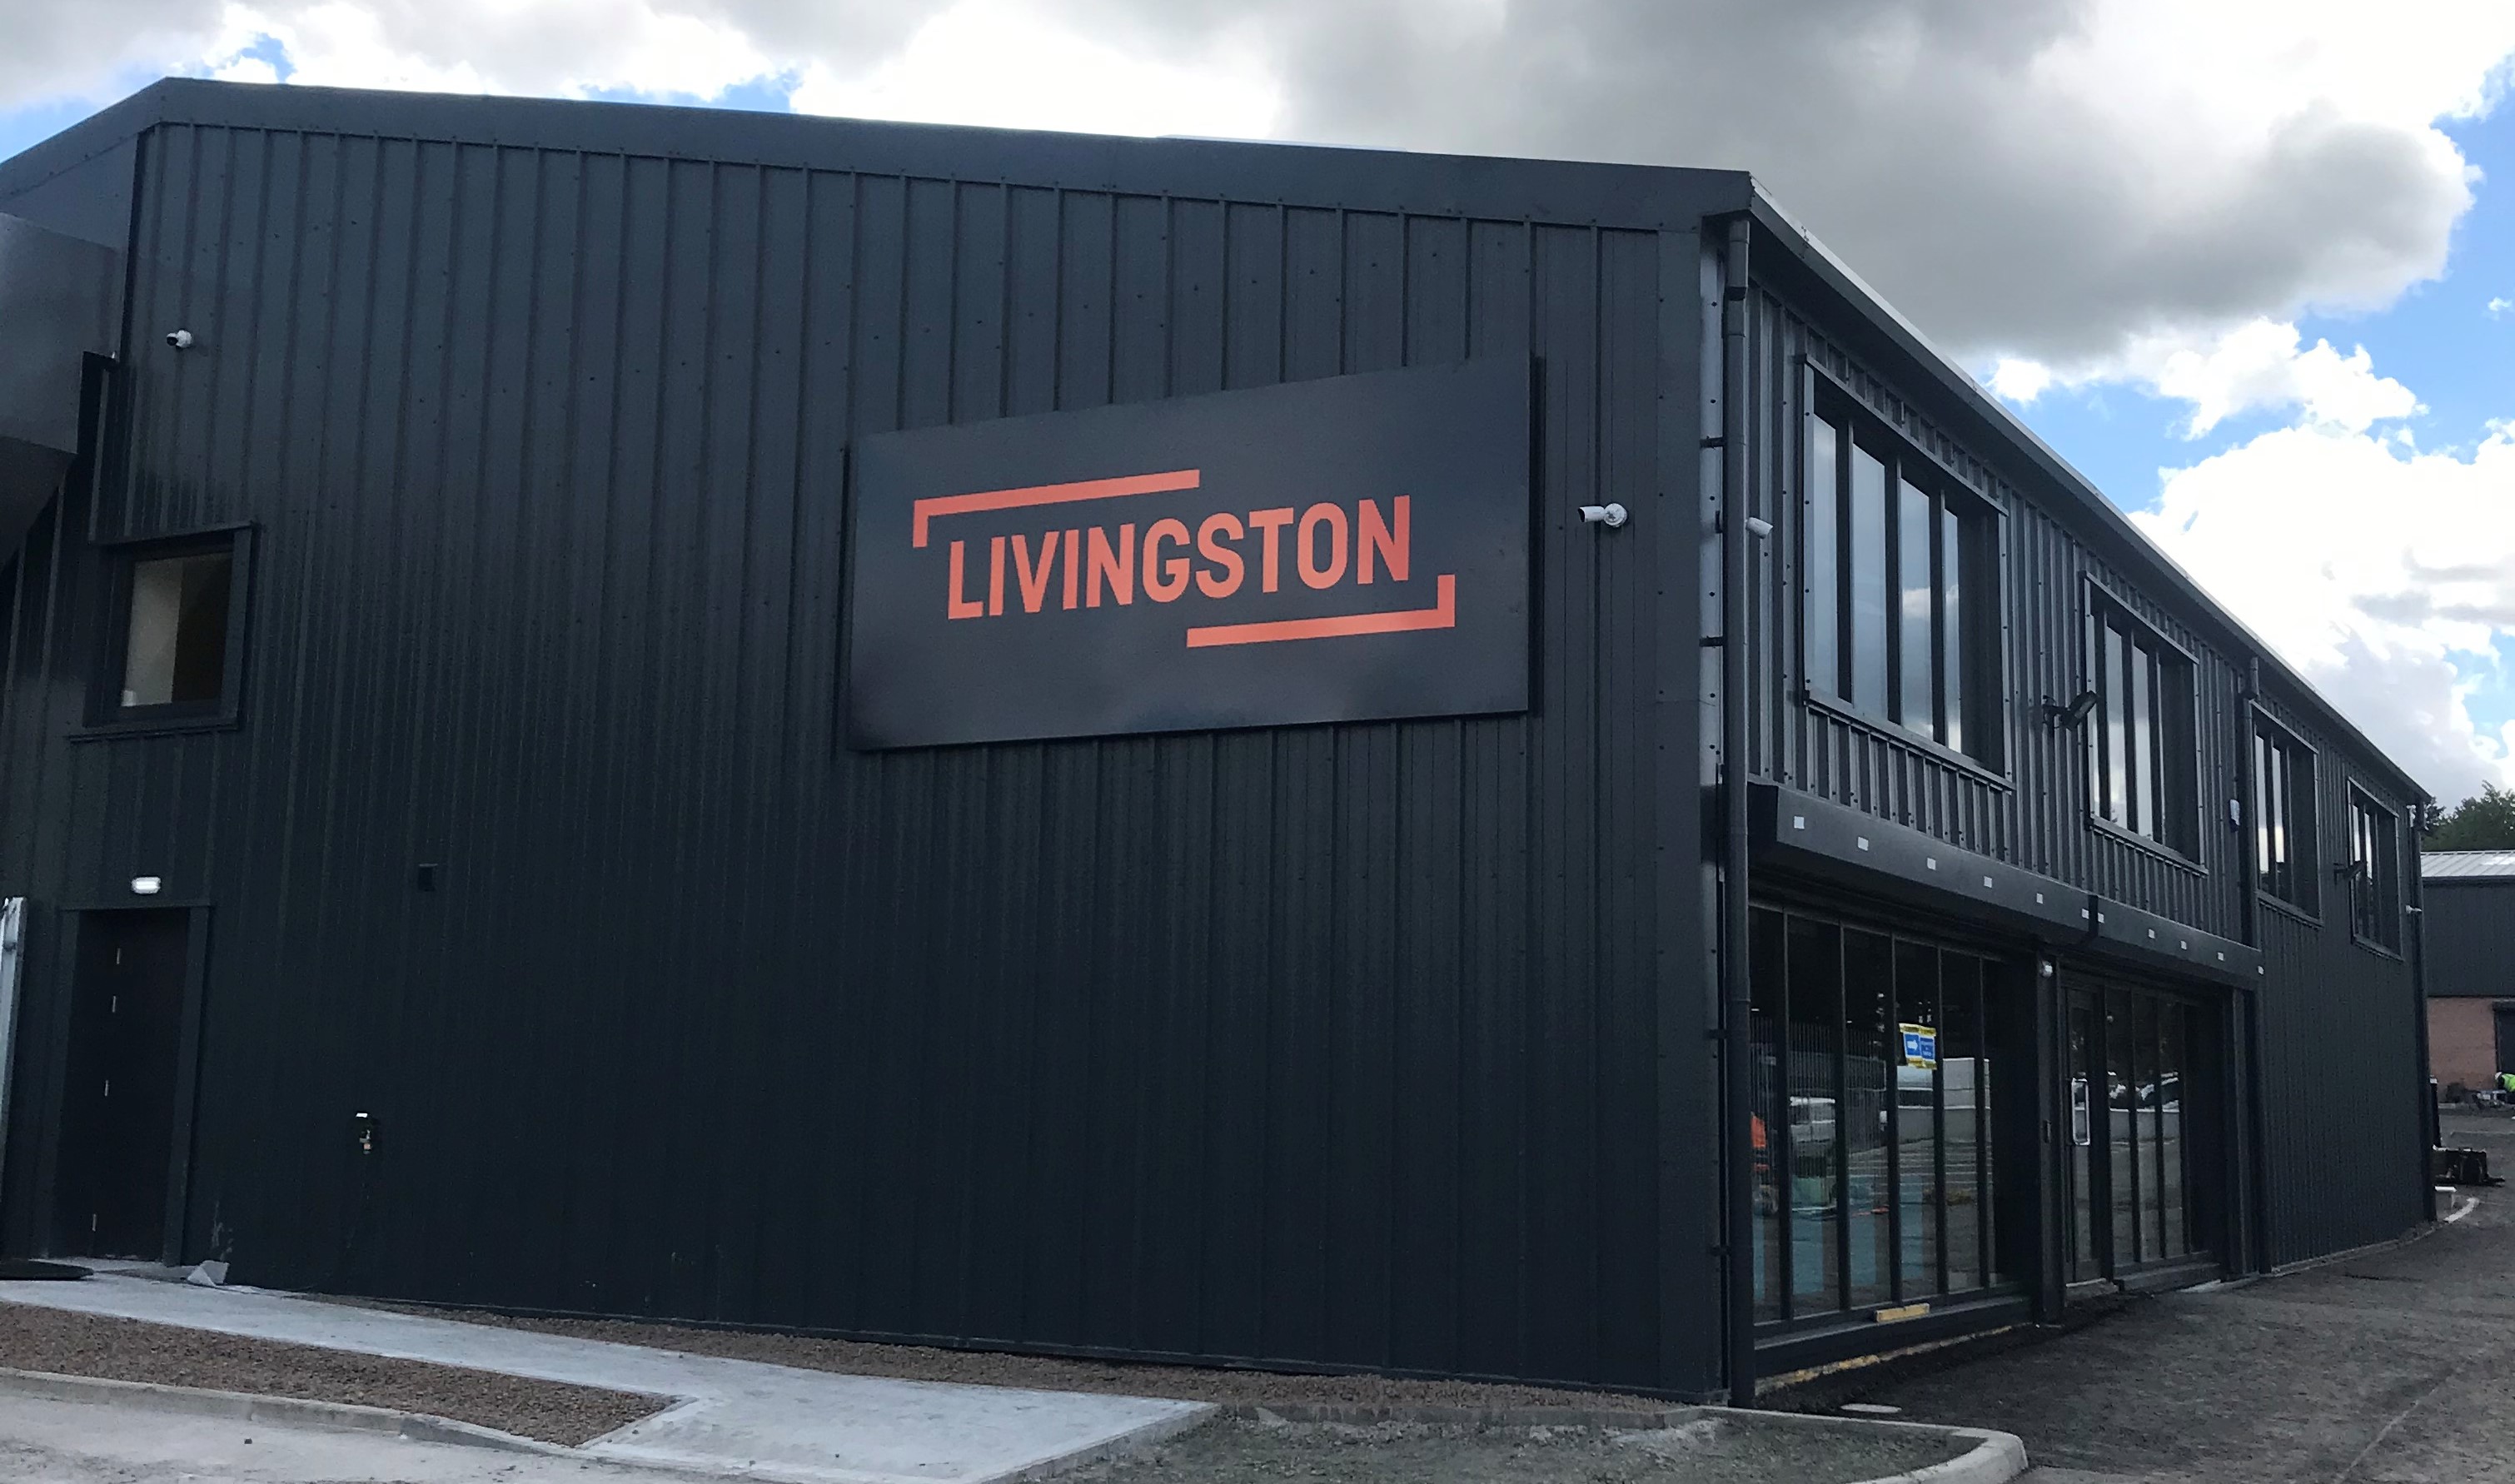 Livingston Building Services sees operating profit reach £2.4m